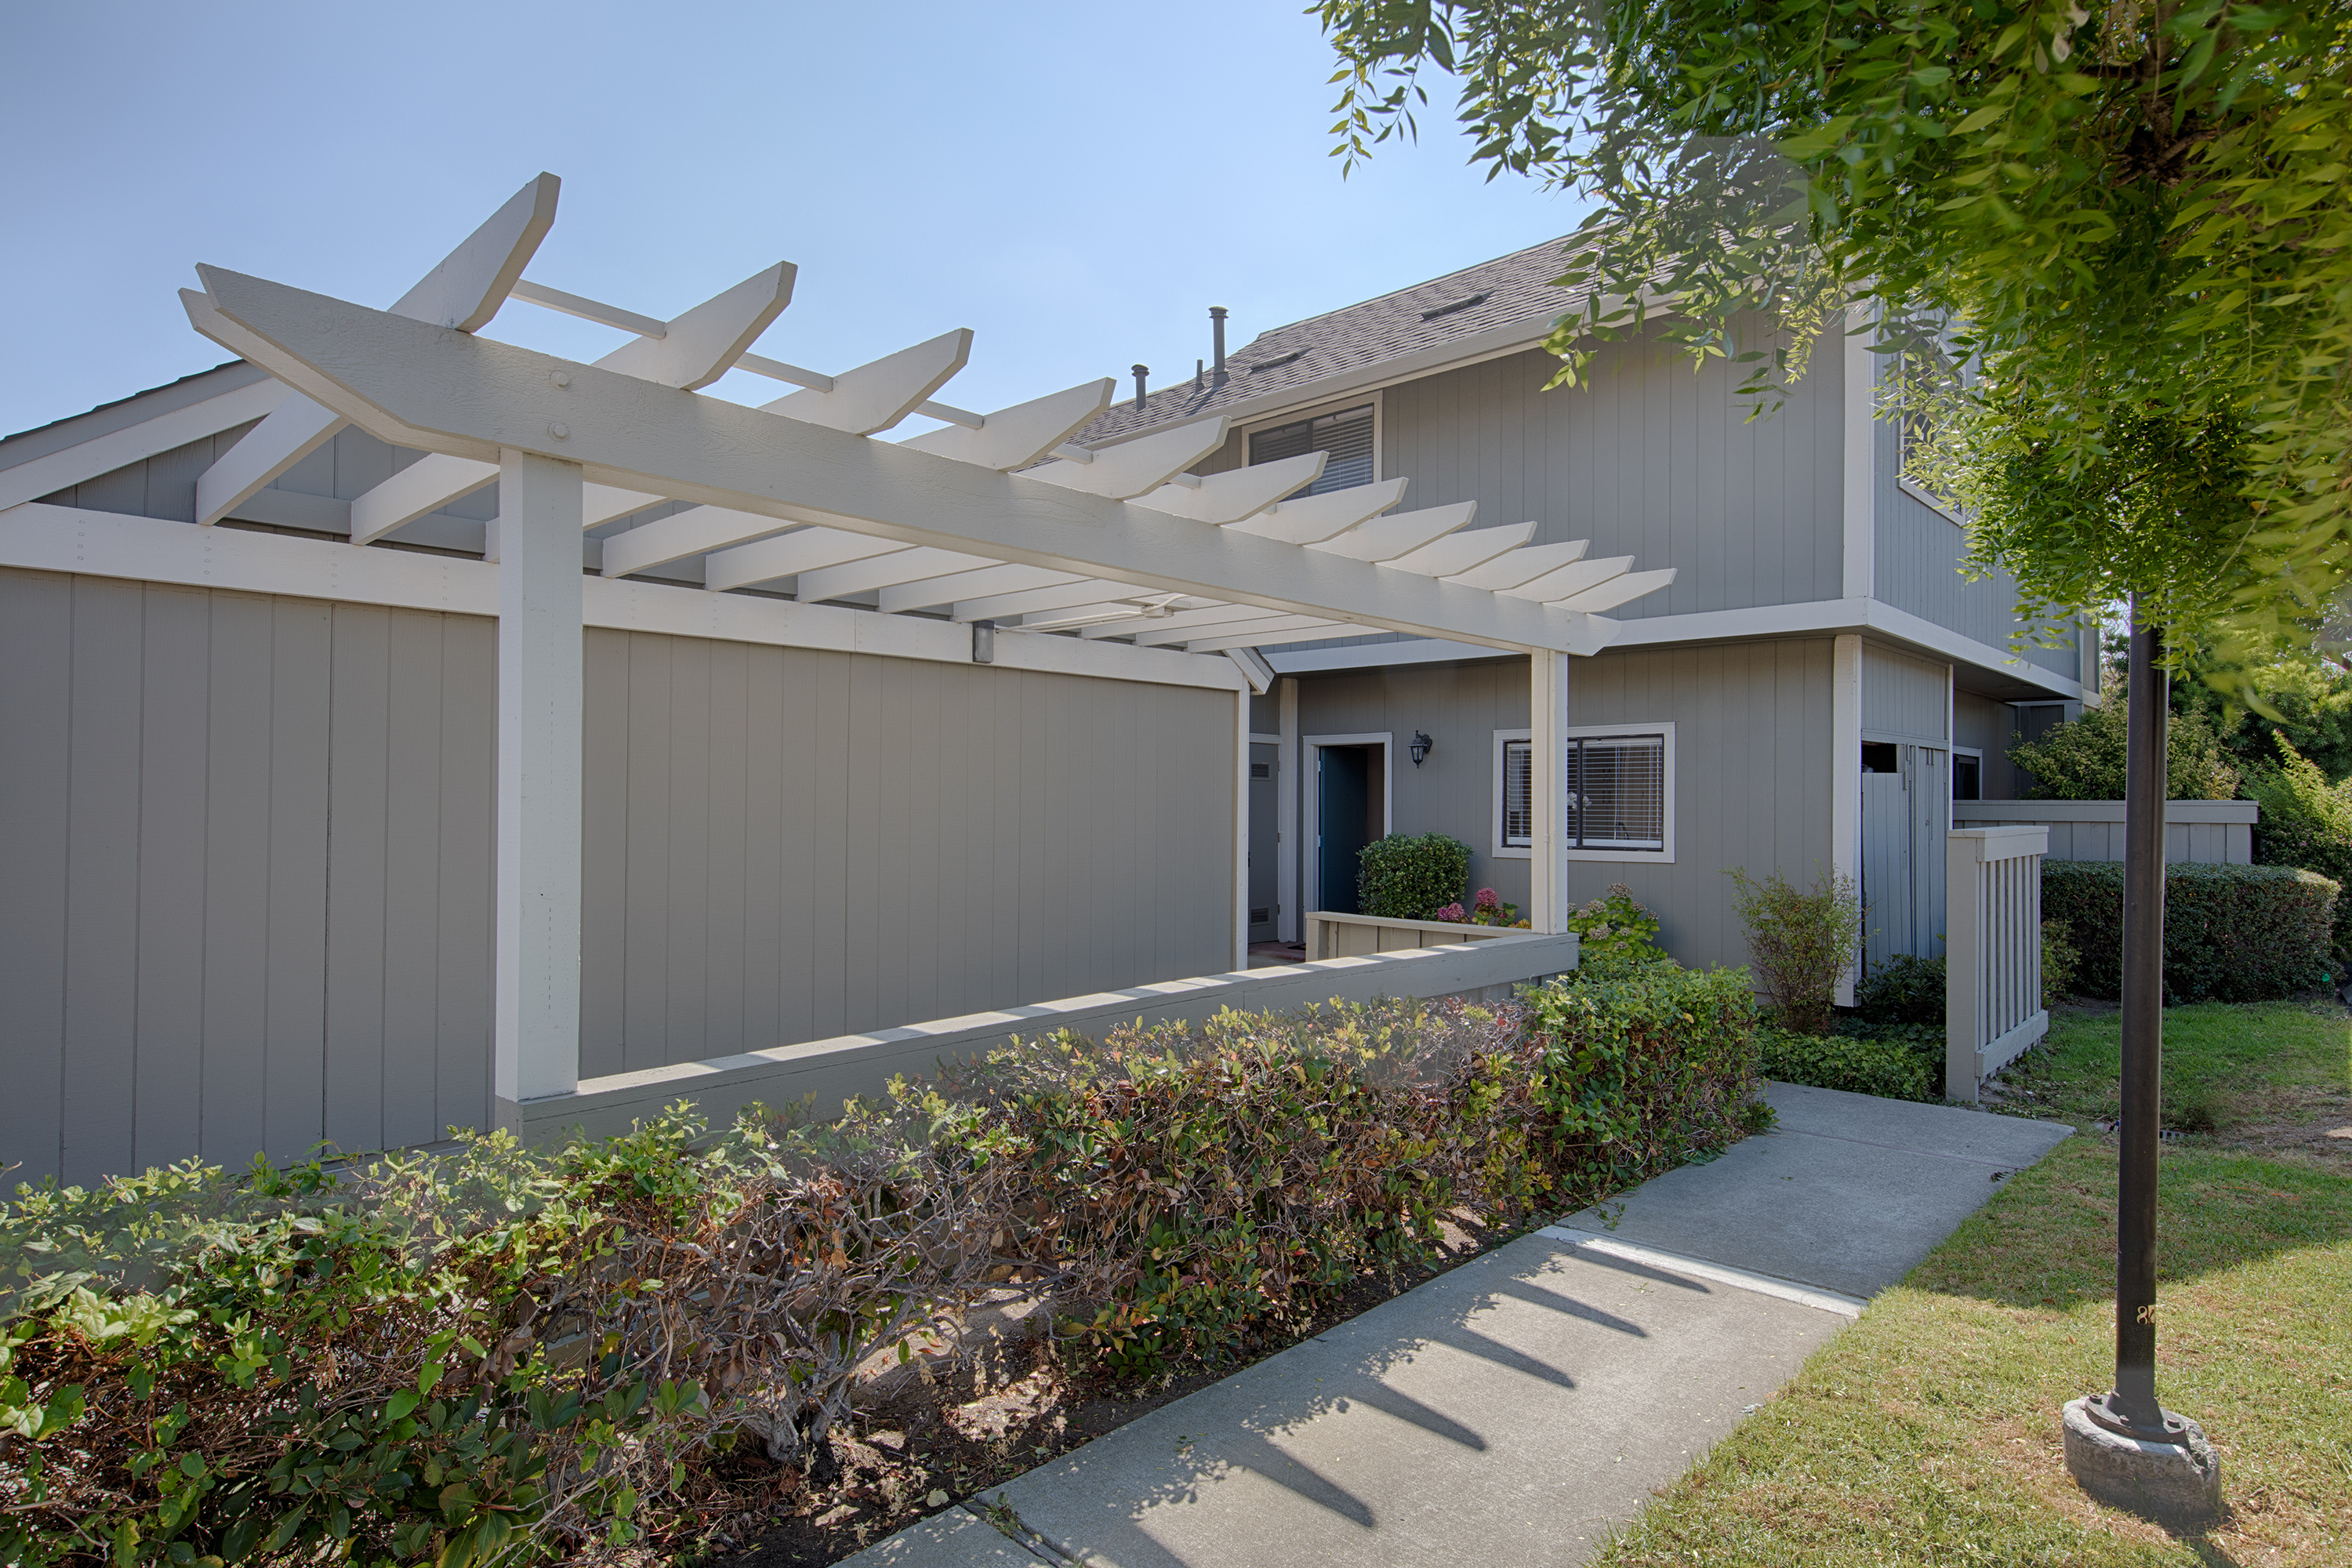 852 Canis Ln, Foster City 94404 - Canis Ln 852 